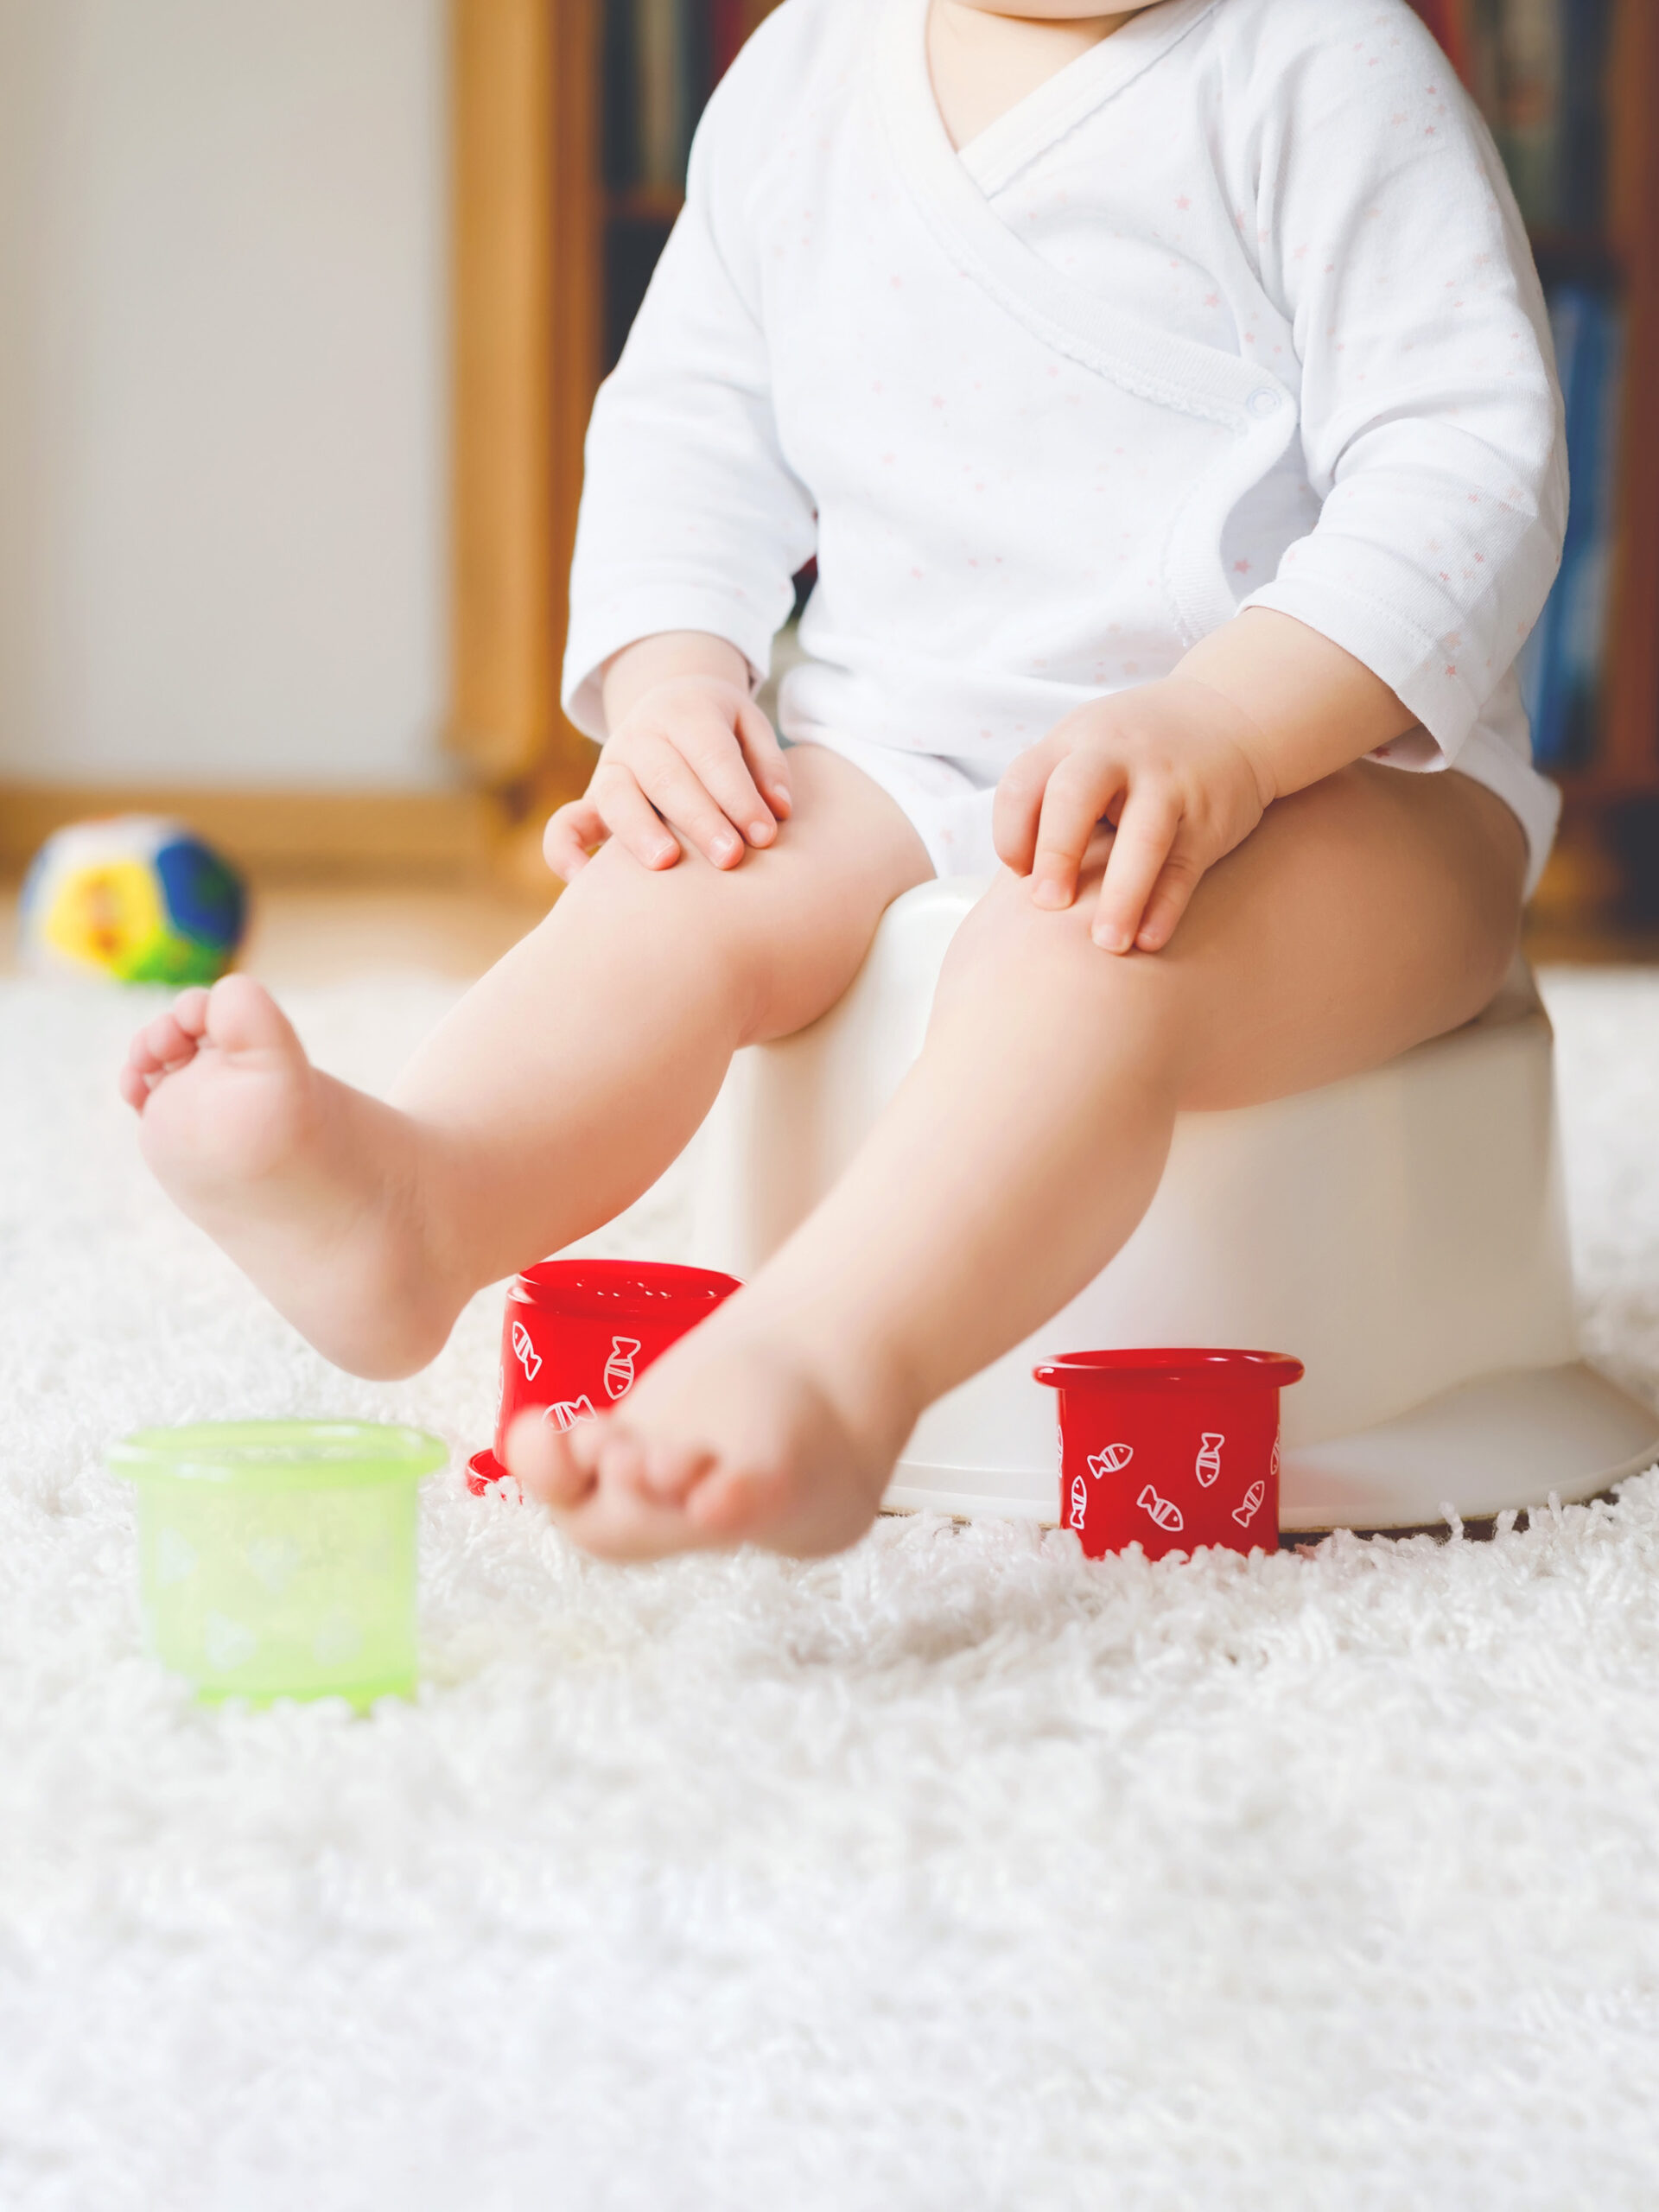 Your child’s pee: An ultimate guide